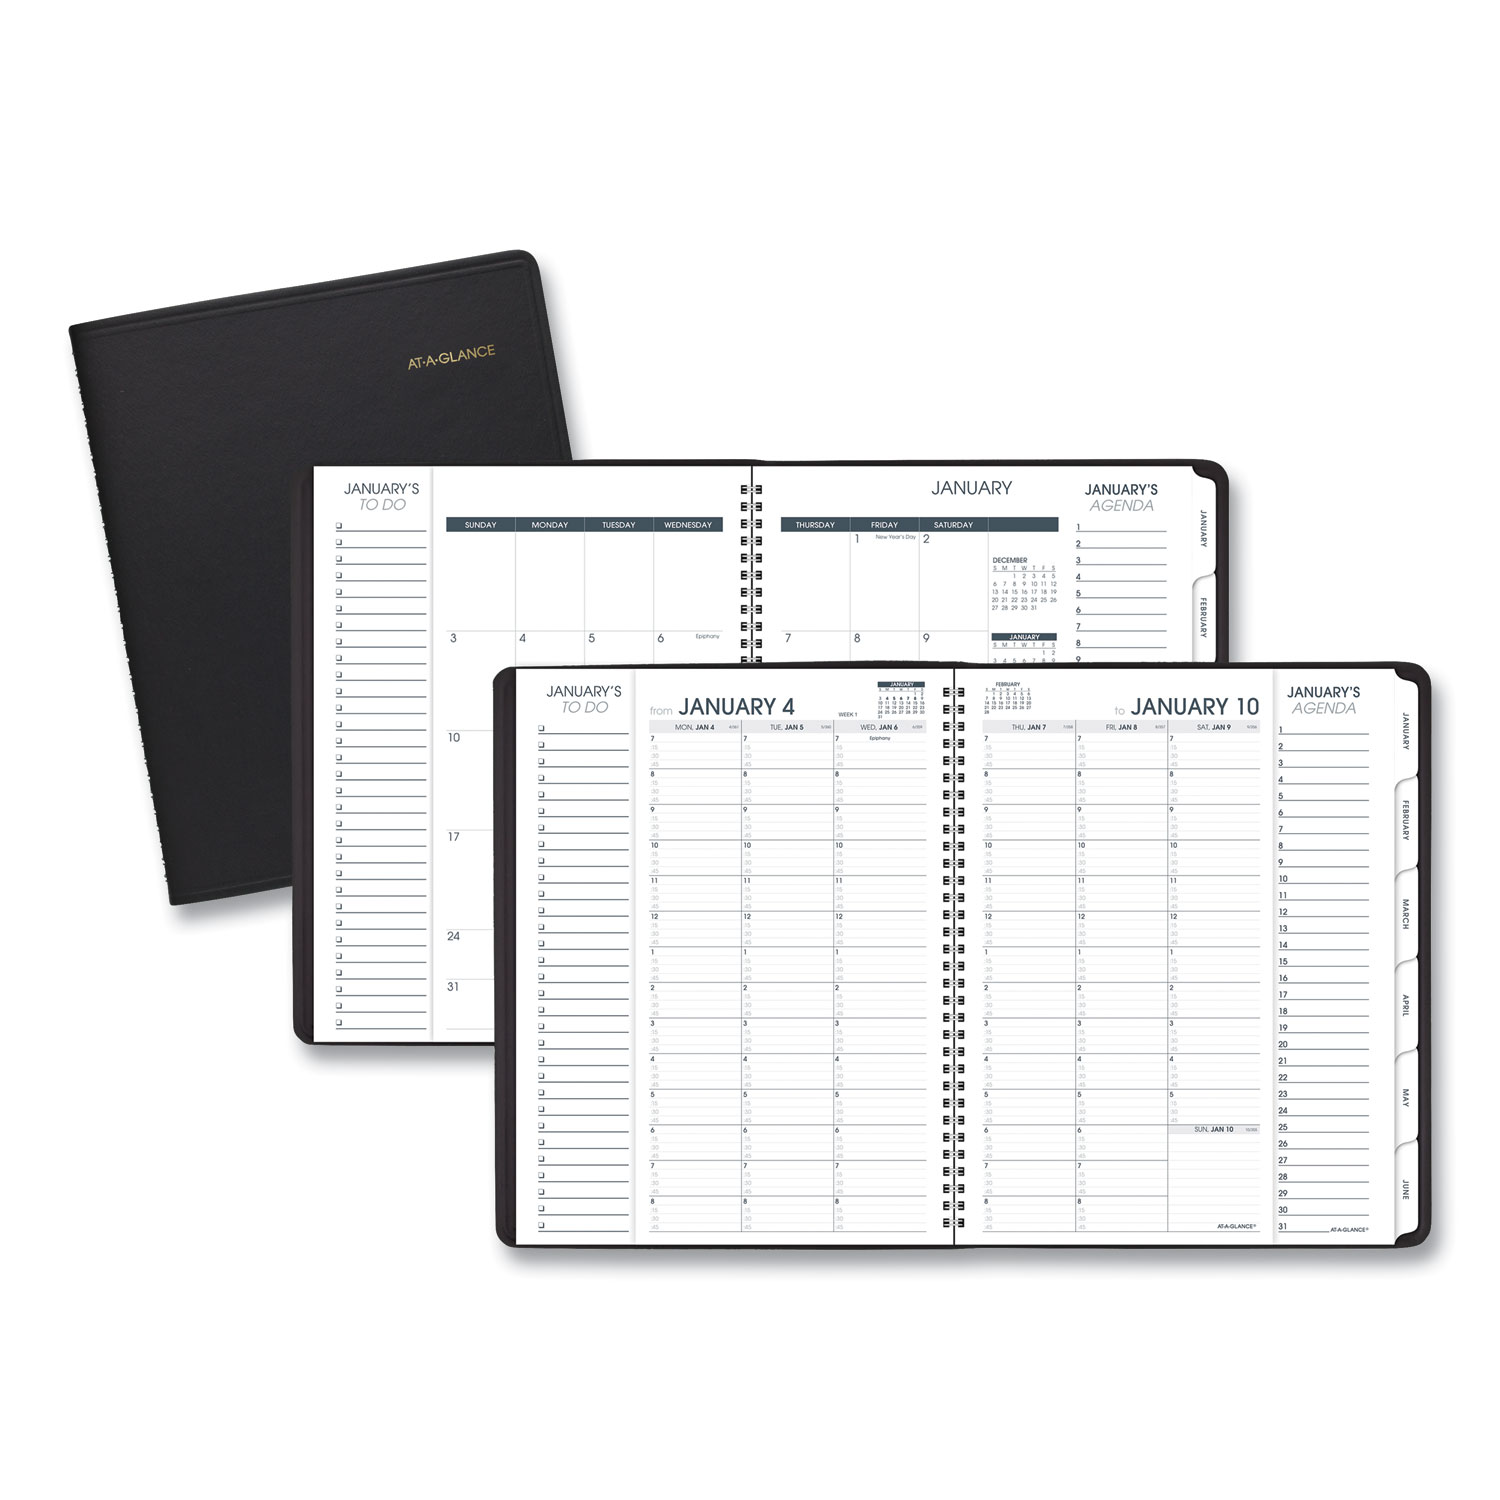  AT-A-GLANCE 70950V05 Triple View Weekly/Monthly Appointment Book, 10 7/8 x 8 1/4, Black, 2020 (AAG70950V05) 